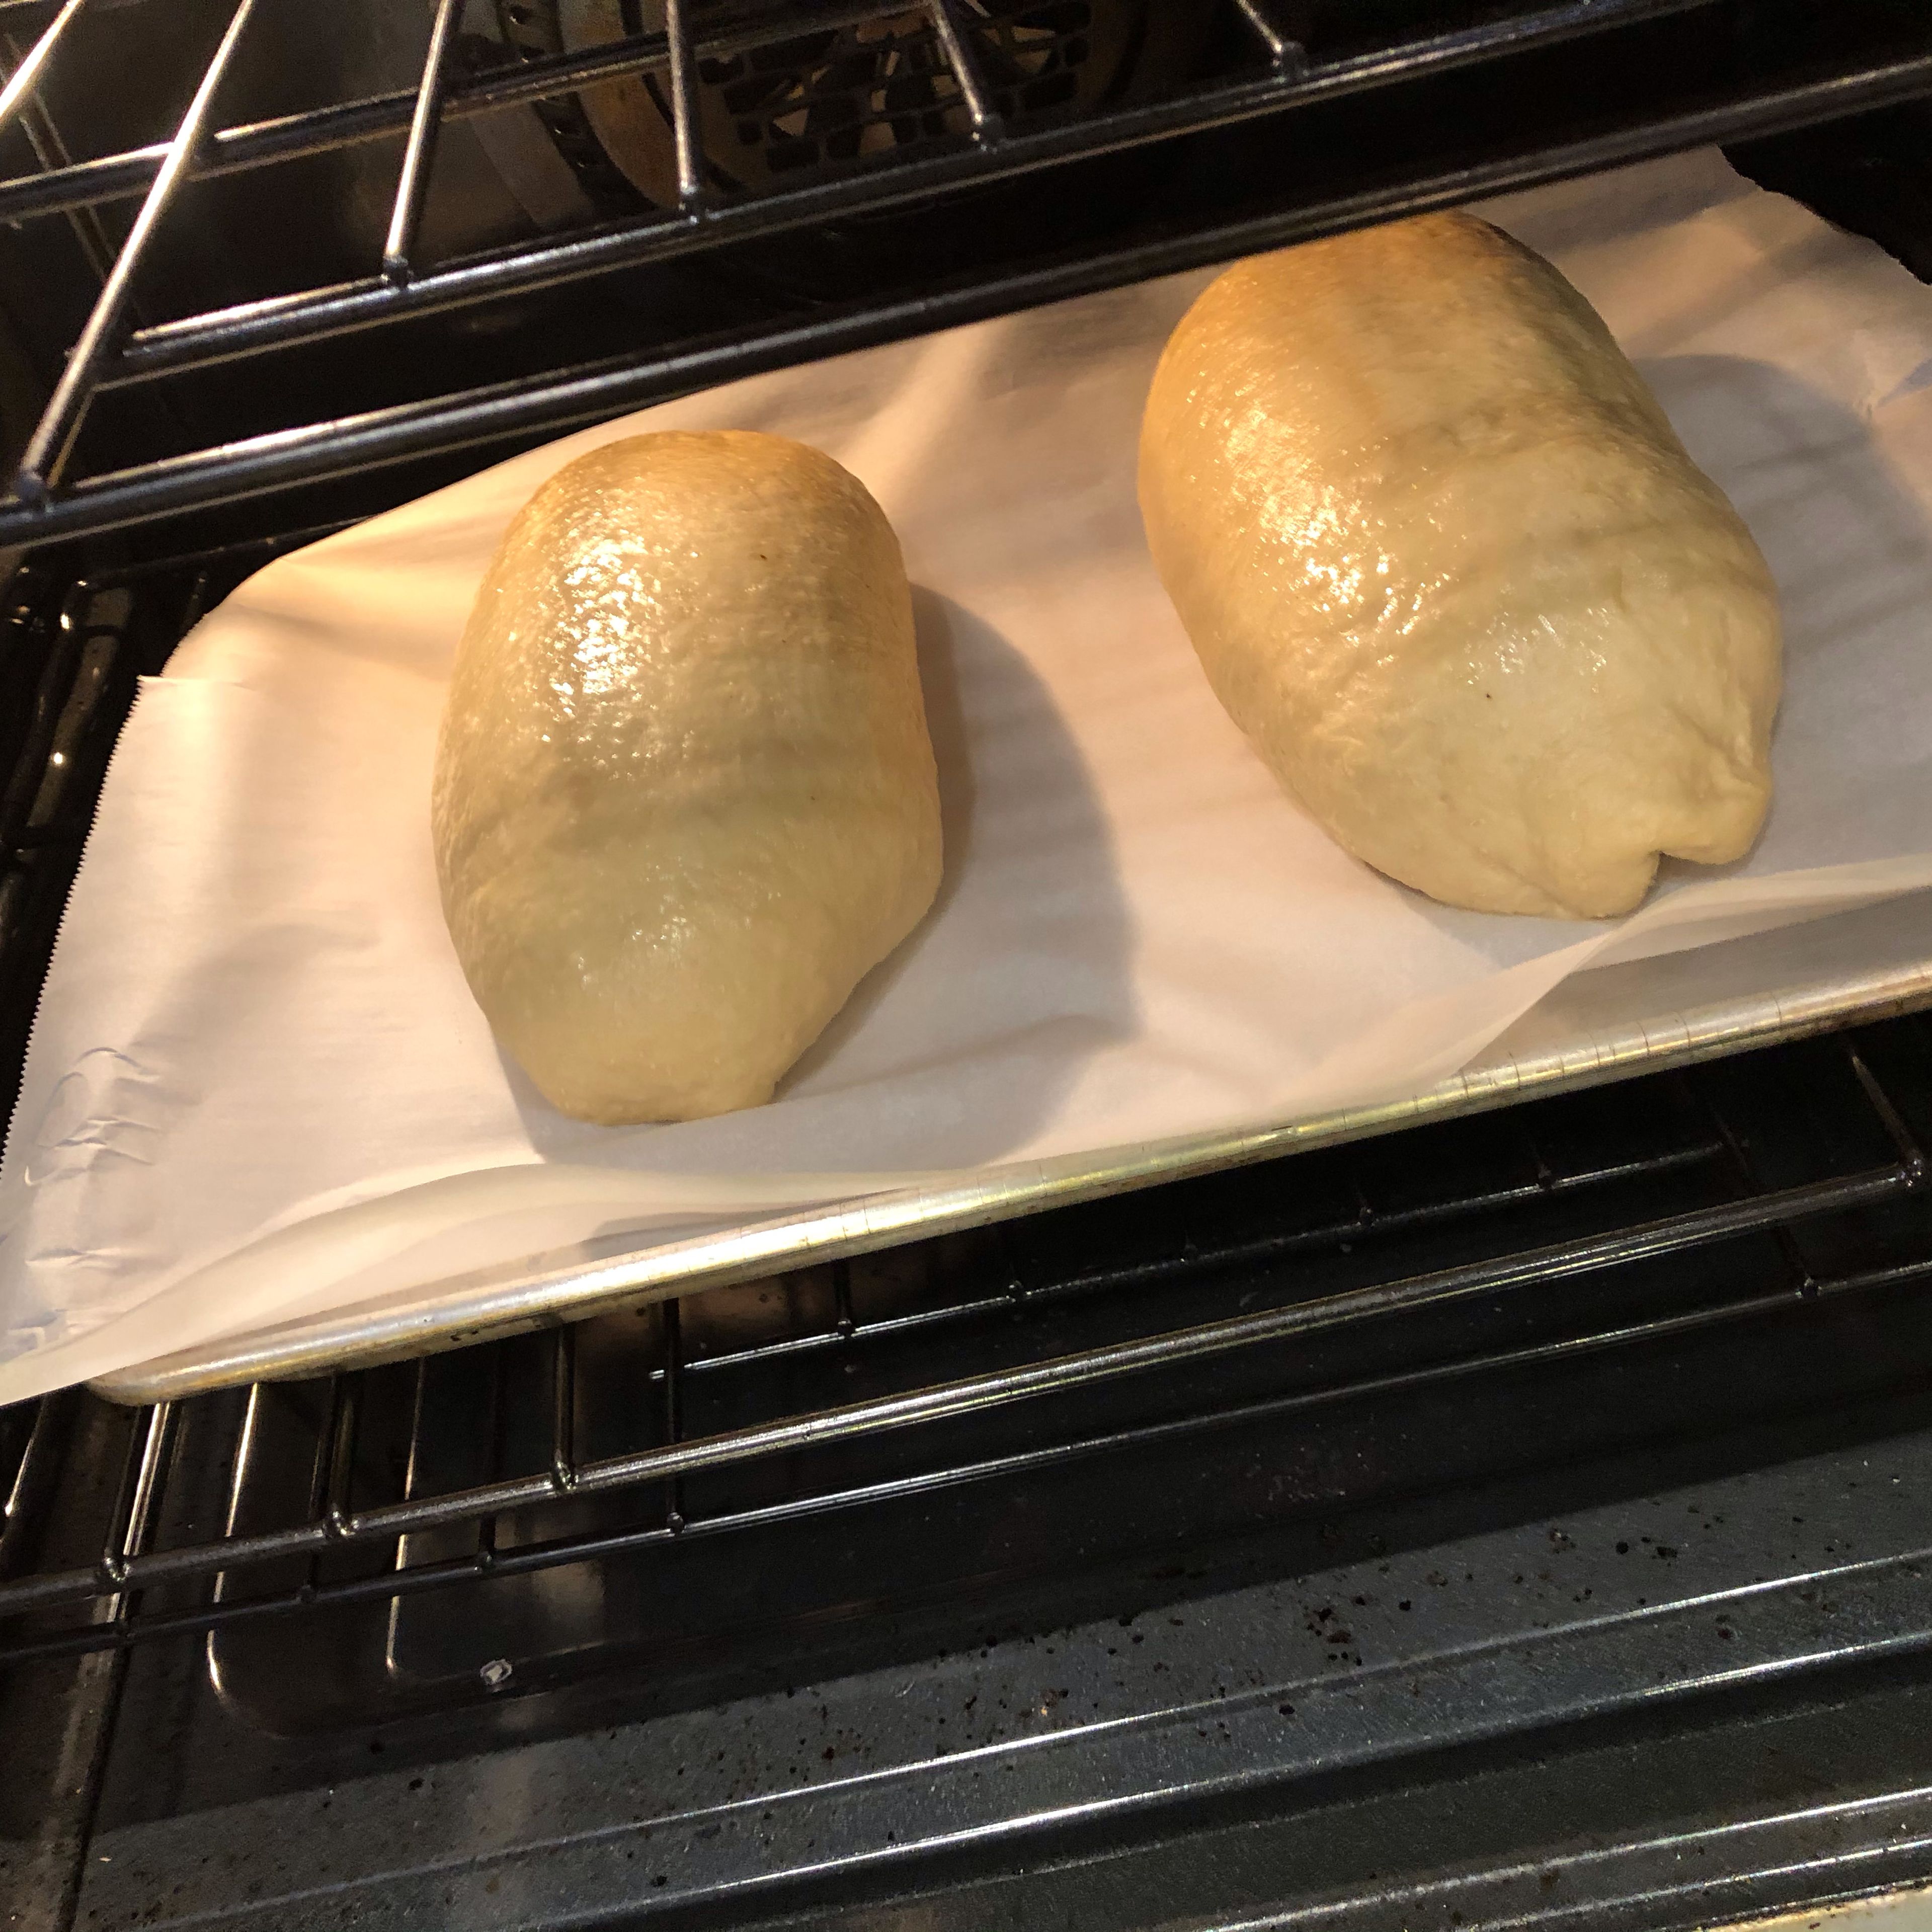 Preheat oven to 410 F. When loaves are fully risen, place baking sheets in oven and bake for 20 - 35 minutes (depending on the size of the loaf) or until internal temperature of the loaf reaches 195 F. If testing bread temperature, insert probe into loaf in an area where there is only dough and not the almond paste. The paste will not reach that temperature.